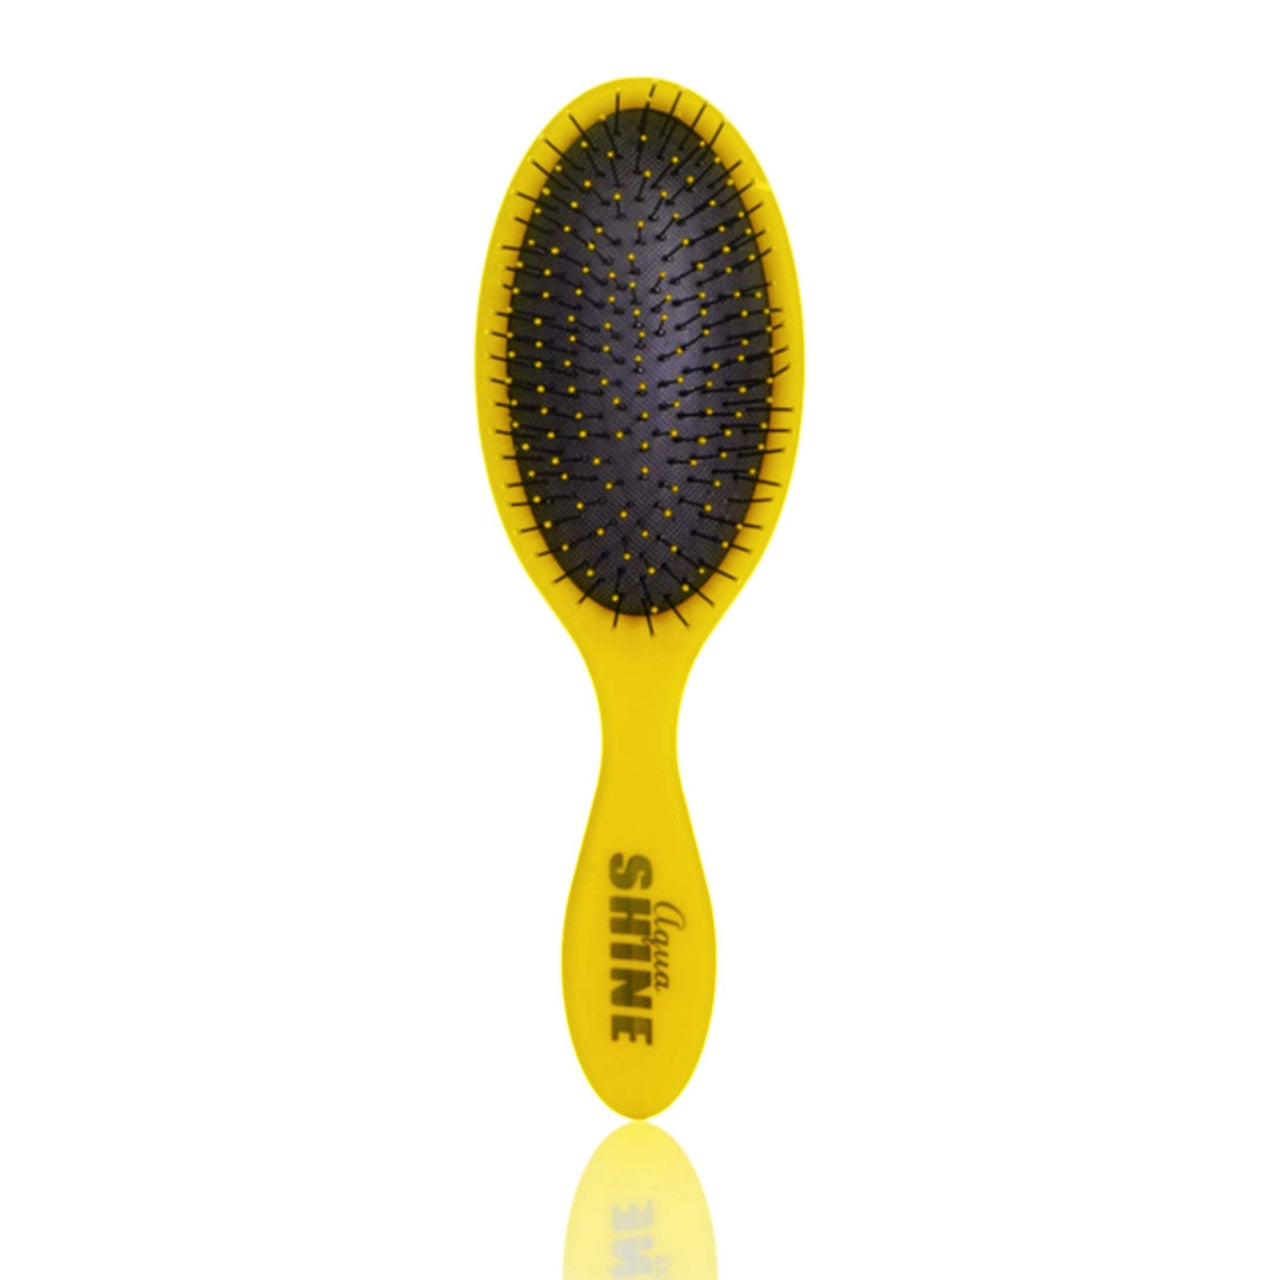 Wet Dry Brush Soft Flexible Bristles Detangles and Smooths with Ease - Yellow